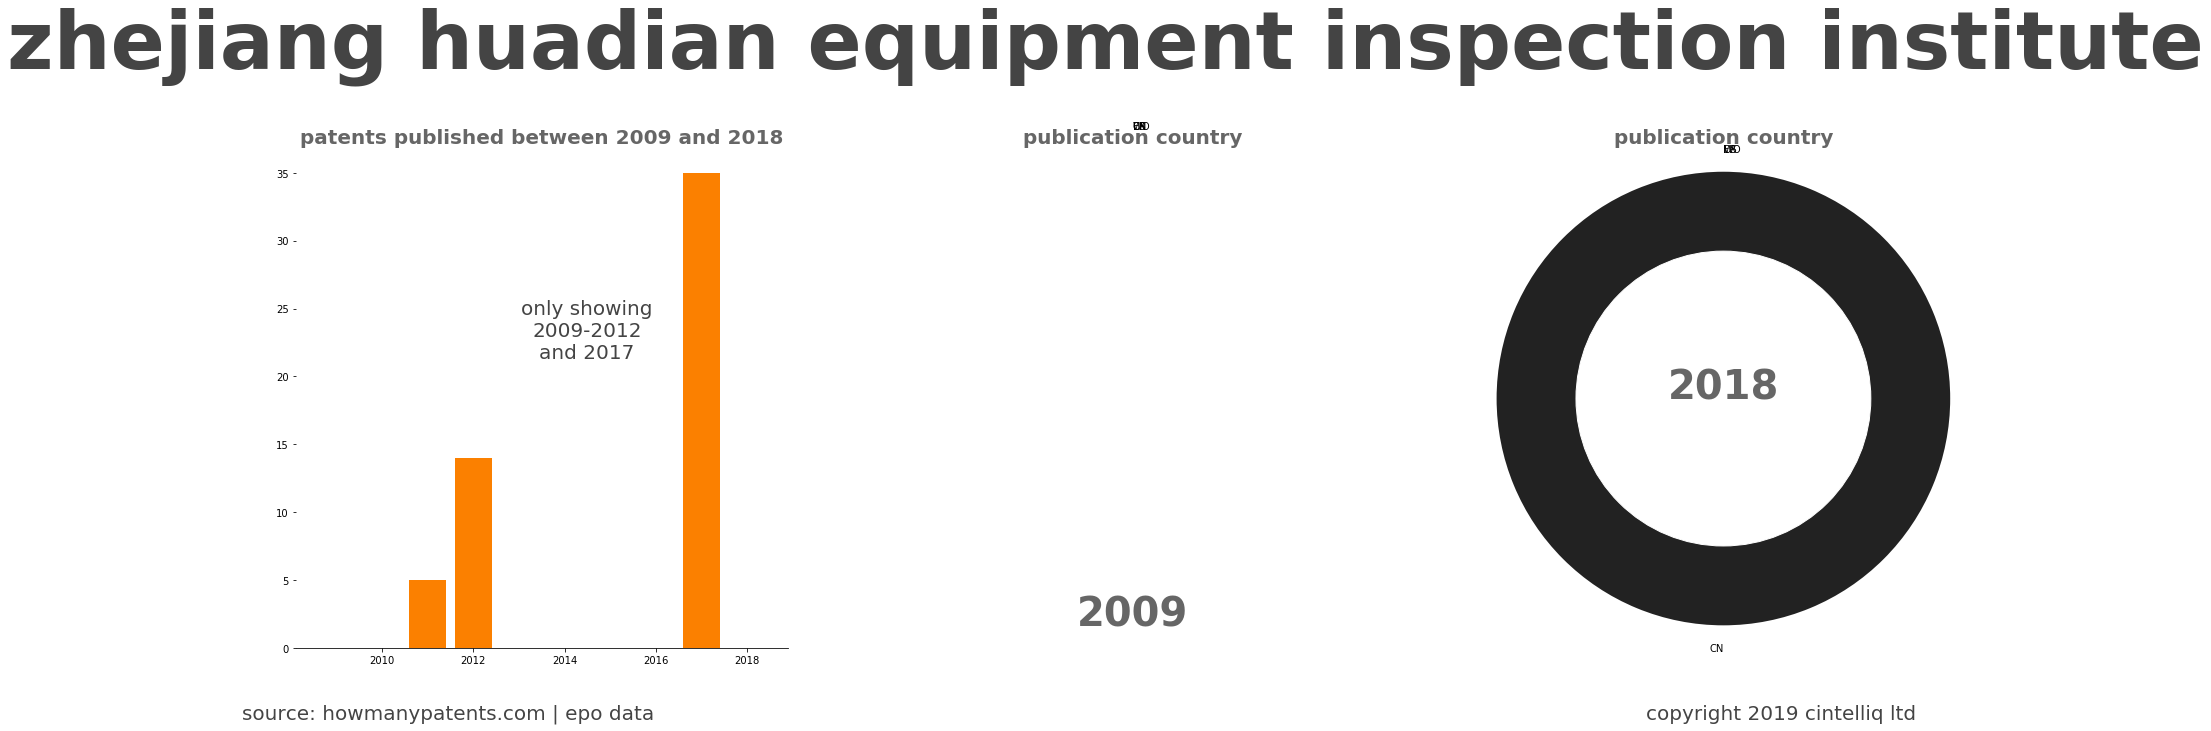 summary of patents for Zhejiang Huadian Equipment Inspection Institute